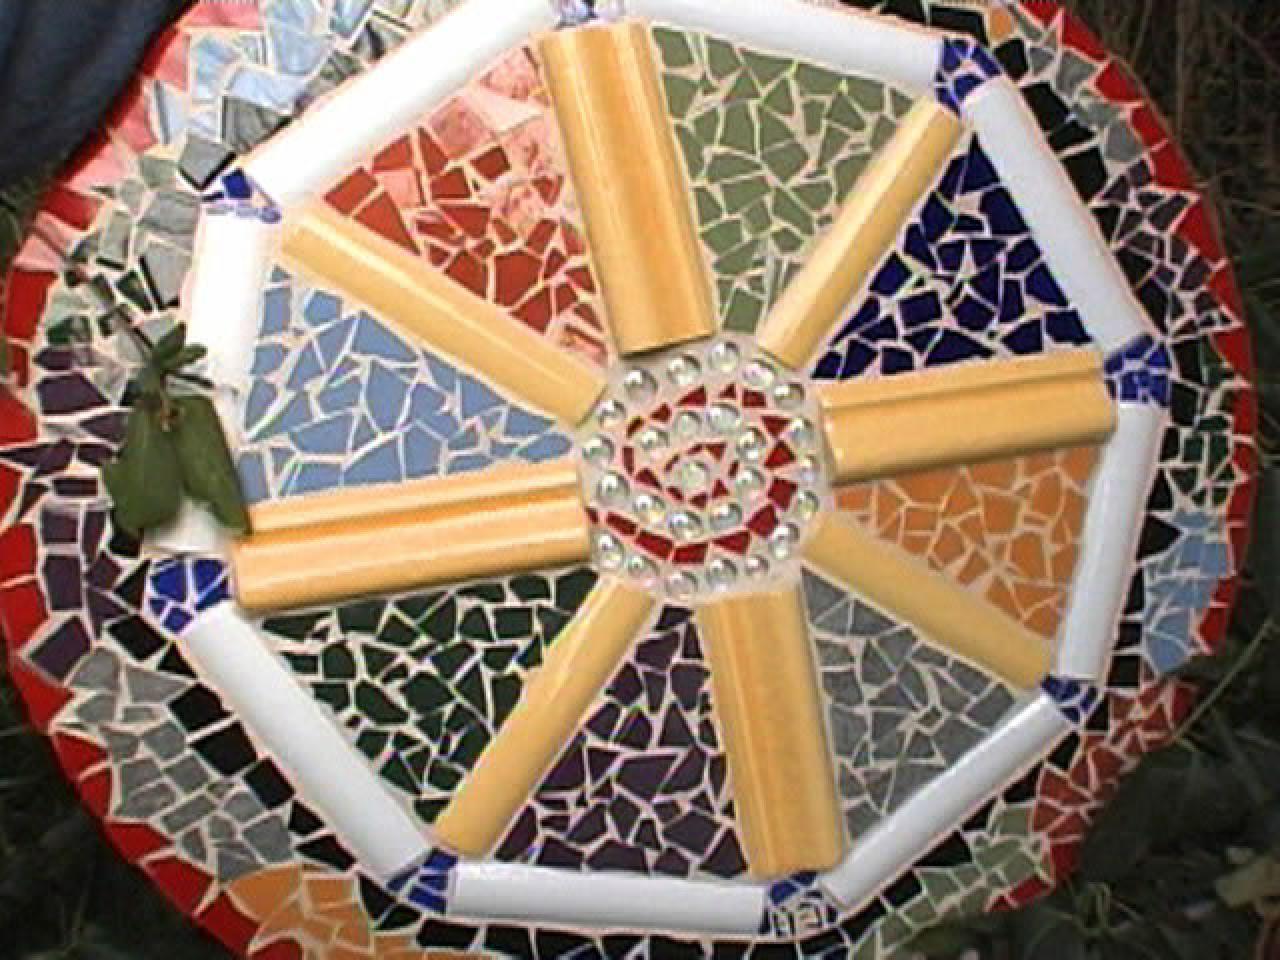 How To Make Colorful Mosaic Garden Art, How To Make Mosaic Tile Designs